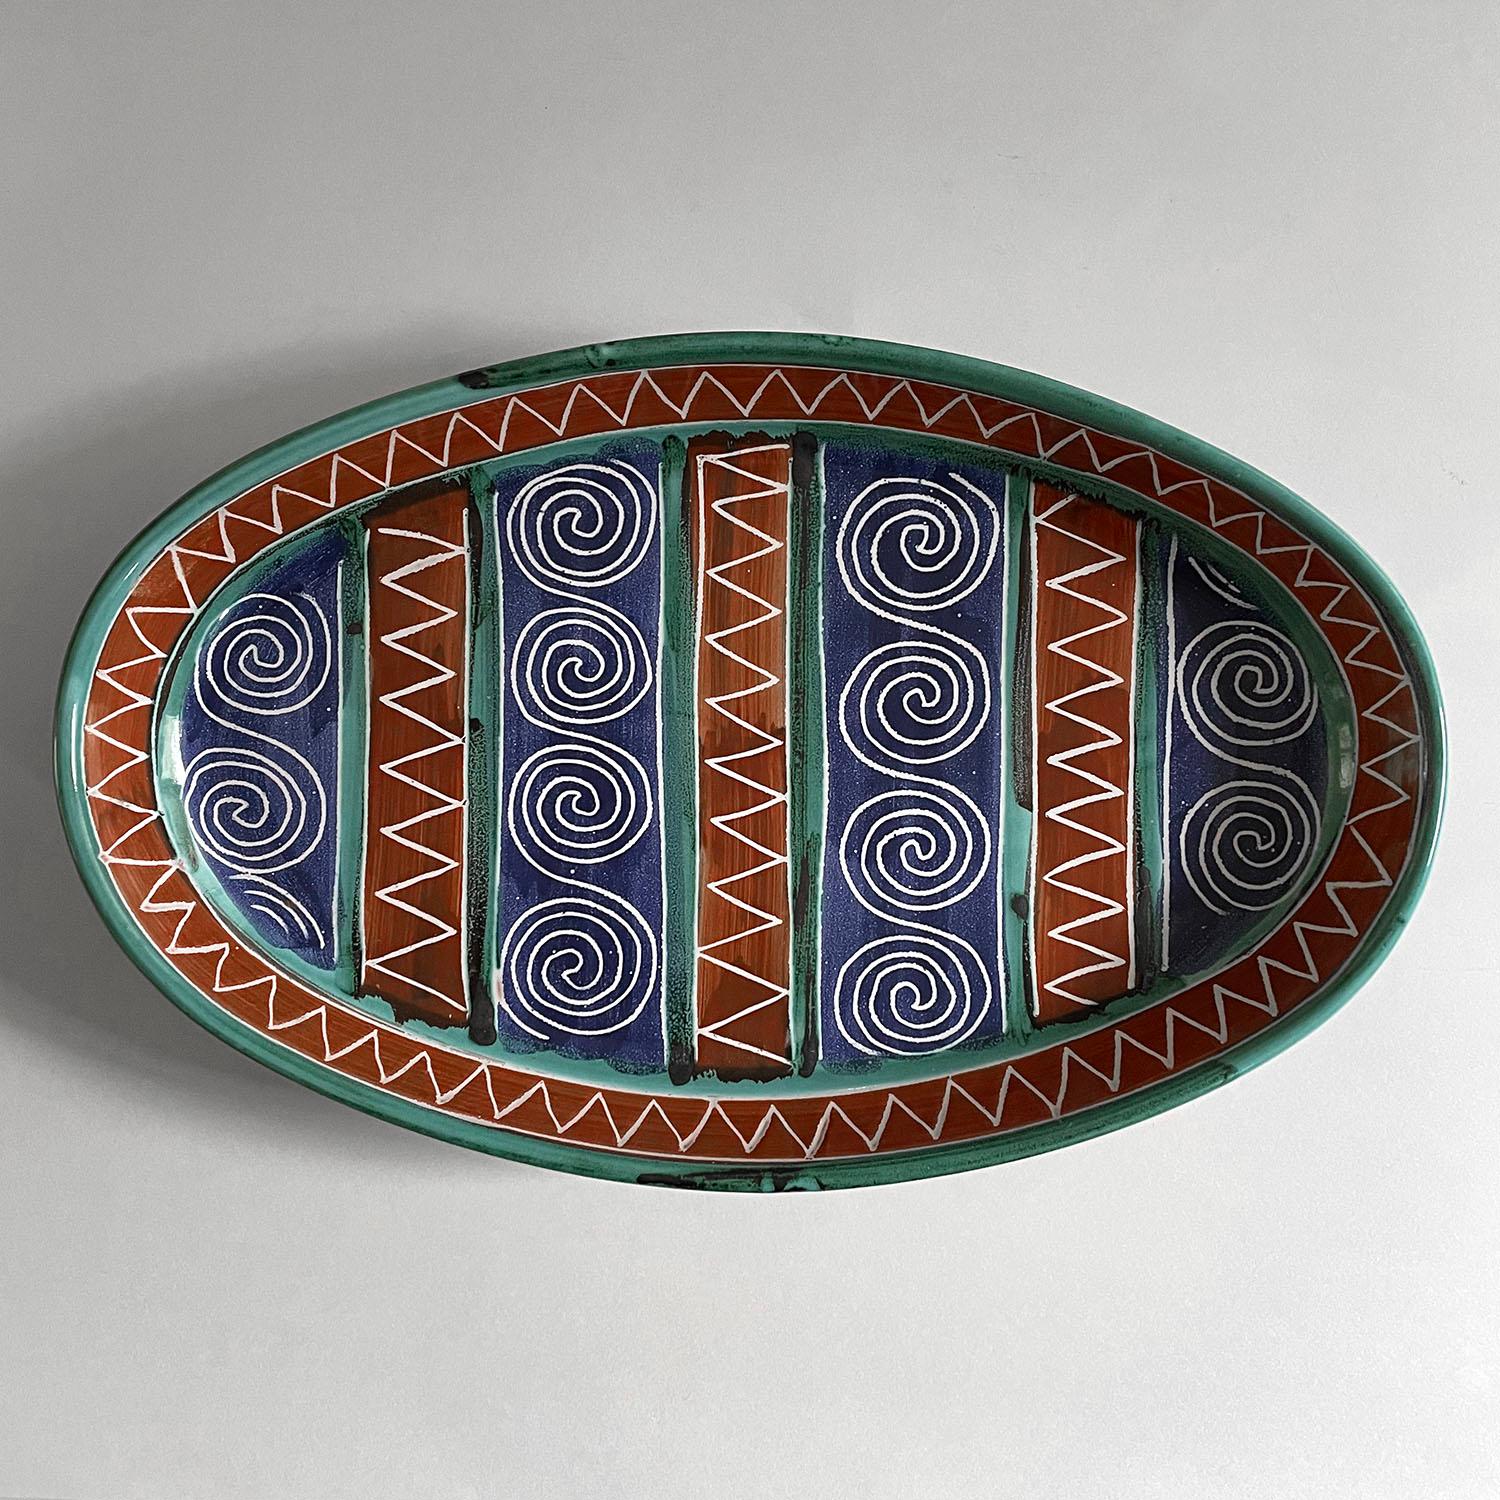 Robert Picault ceramic oval tray
France, circa 1950s
Brighten up your table with the perfection of Picault
handcrafted tray has a wonderful color palette and playful patterns
Patina from age and use
Marked identification
Last two photos are